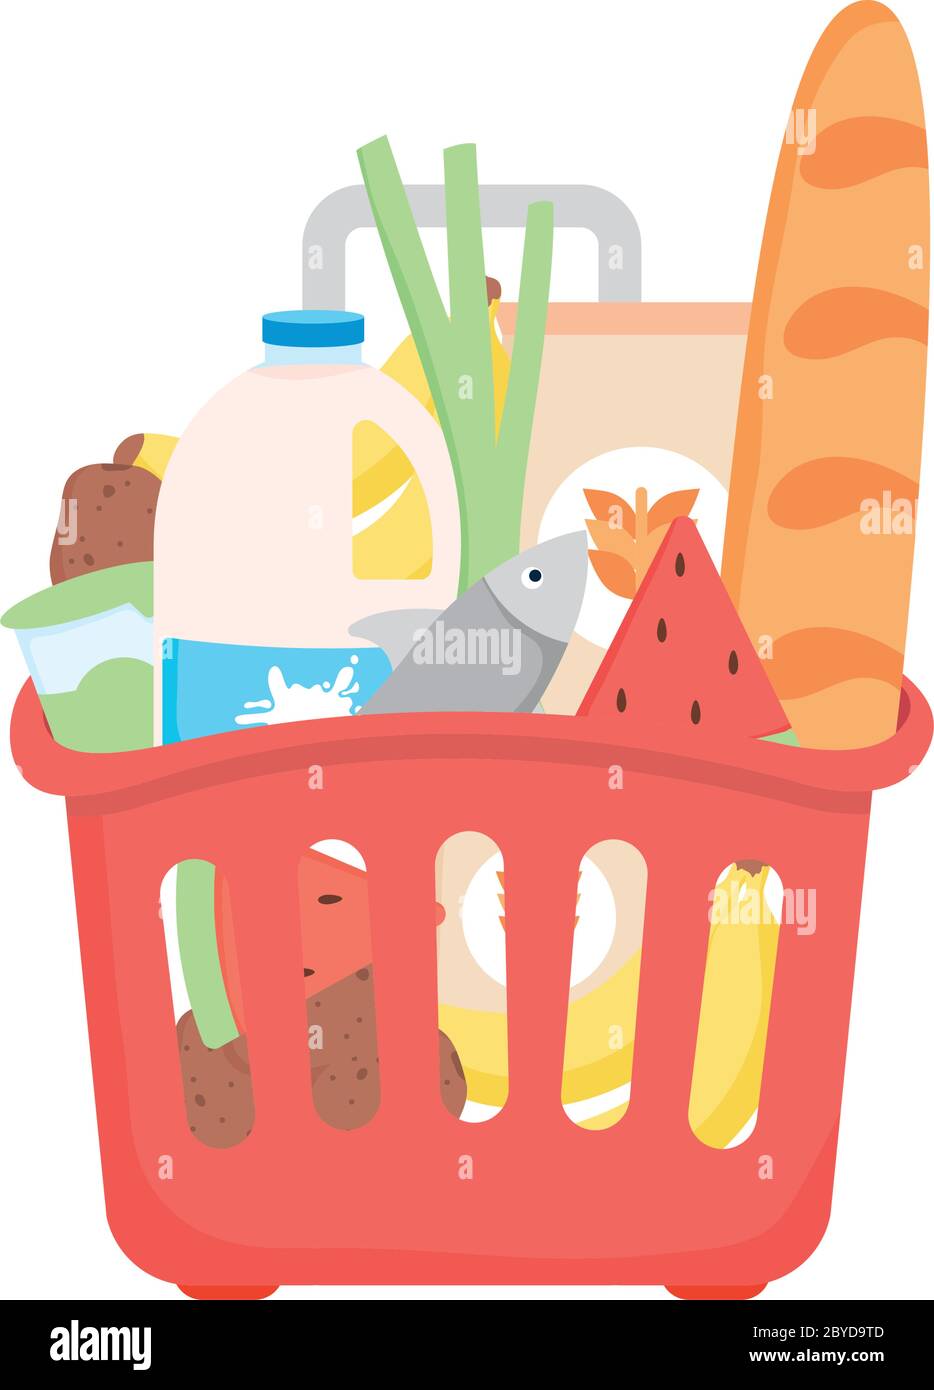 supermarket basket with food and bottles over white background ...